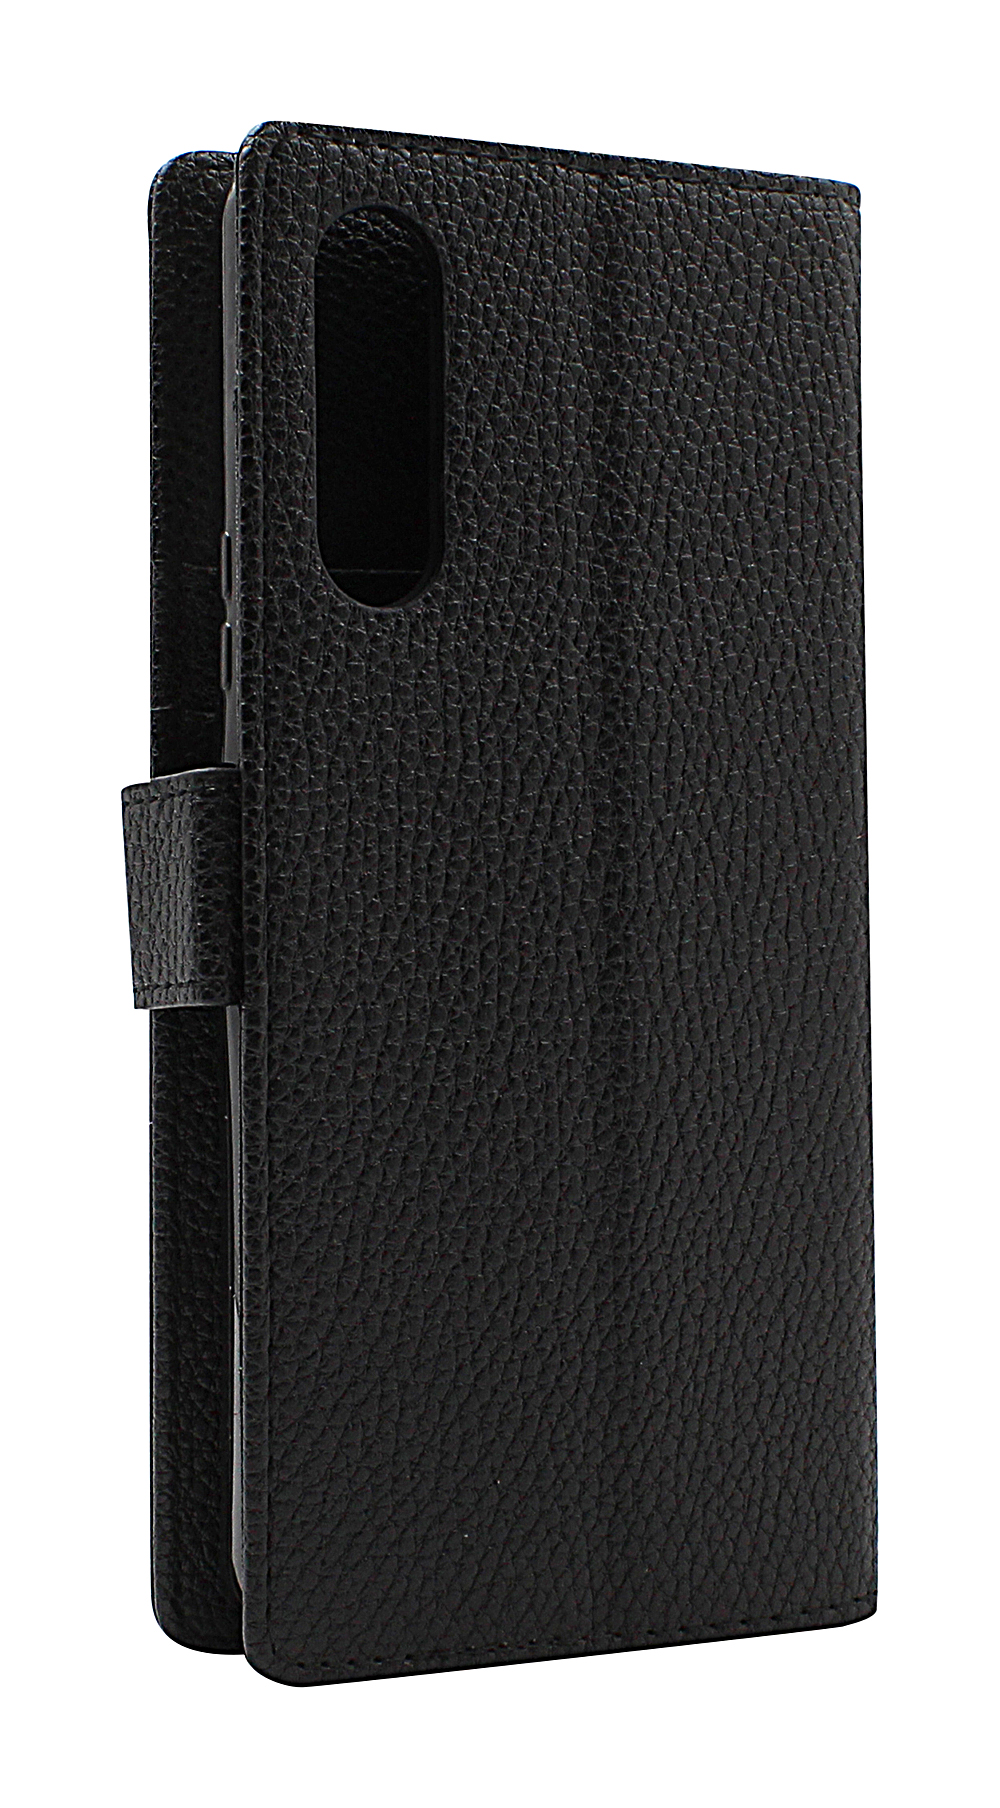 New Standcase Wallet Sony Xperia 10 V 5G